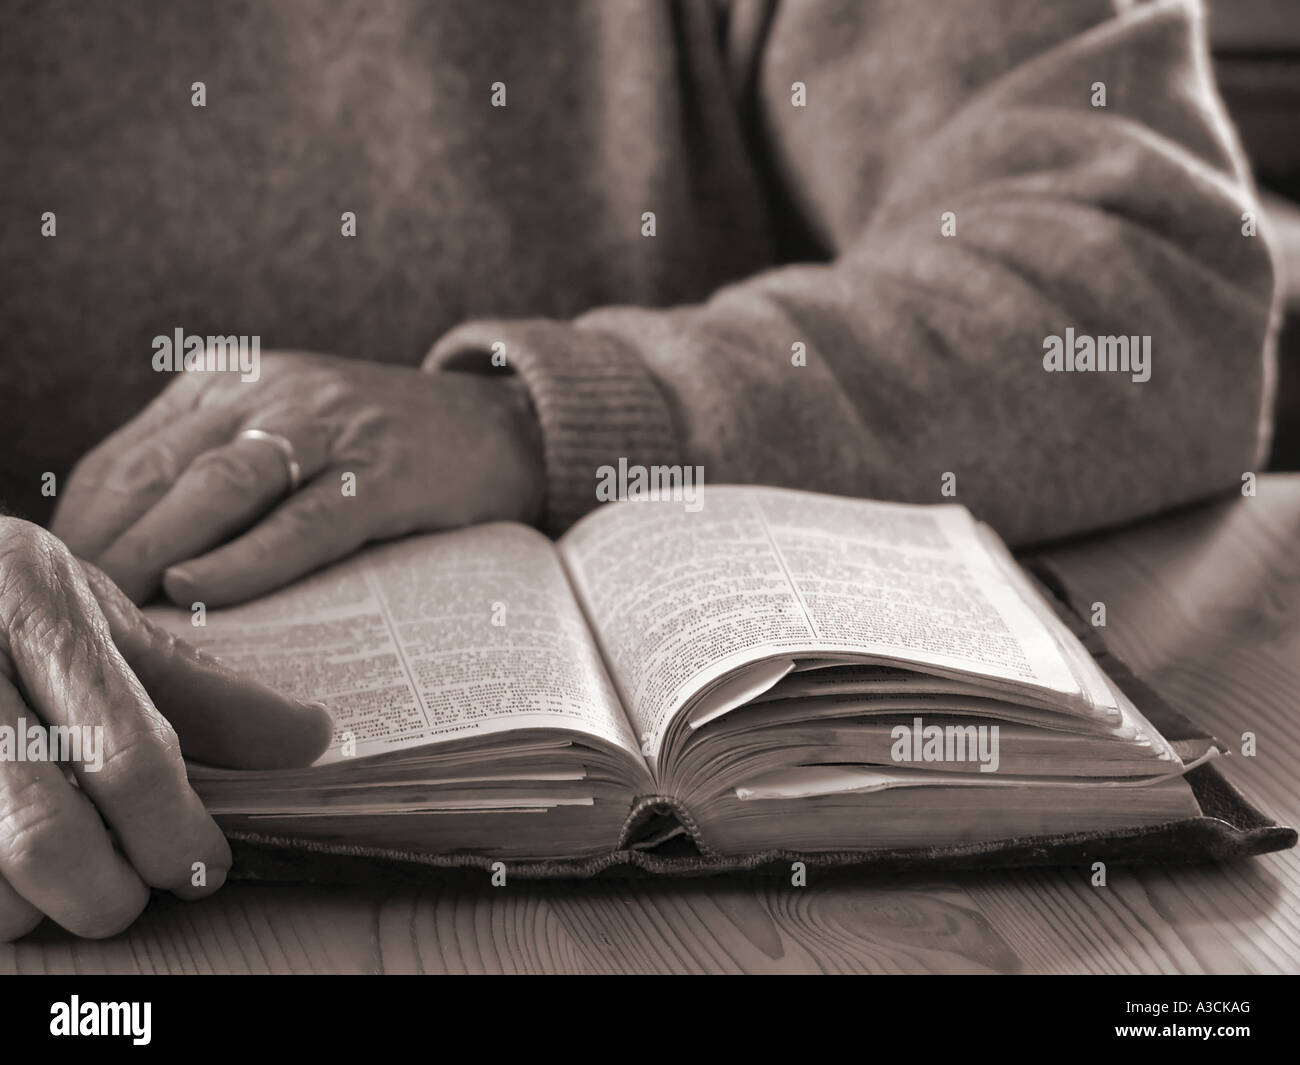 Elderly hands and old, worn Bible Stock Photo